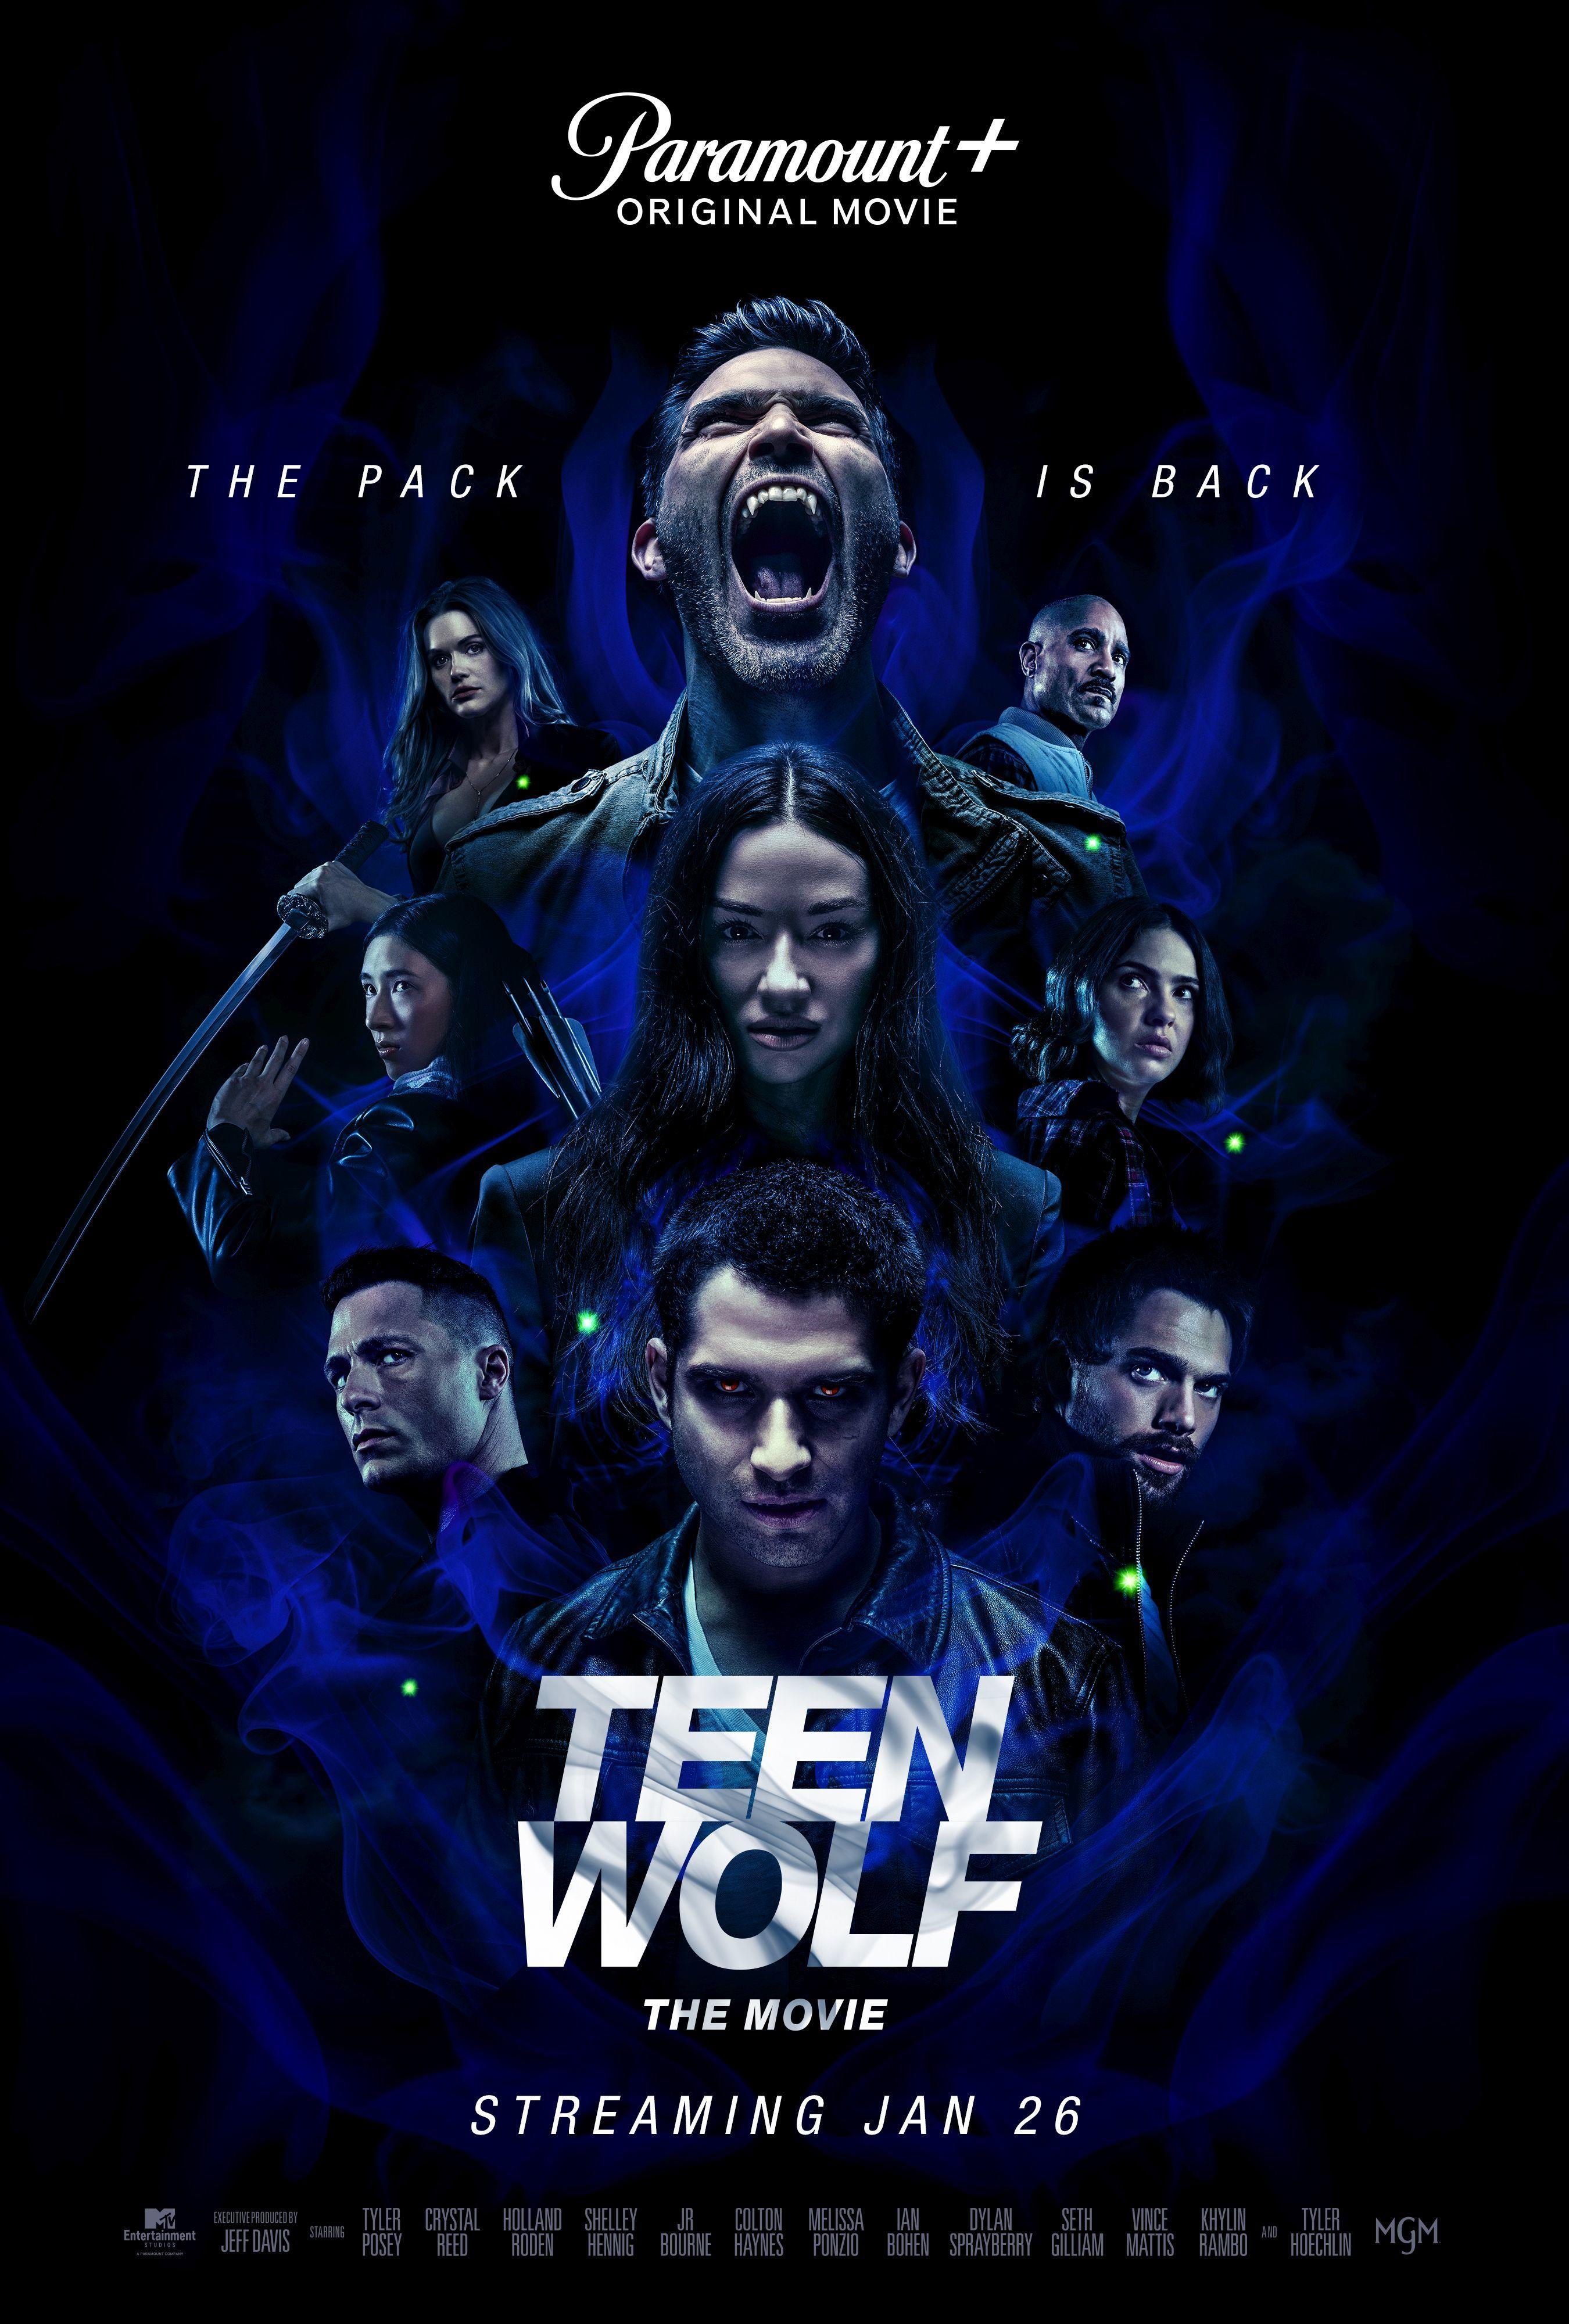 Teen Wolf The Movie Poster Revealed by Paramount+ (Exclusive)